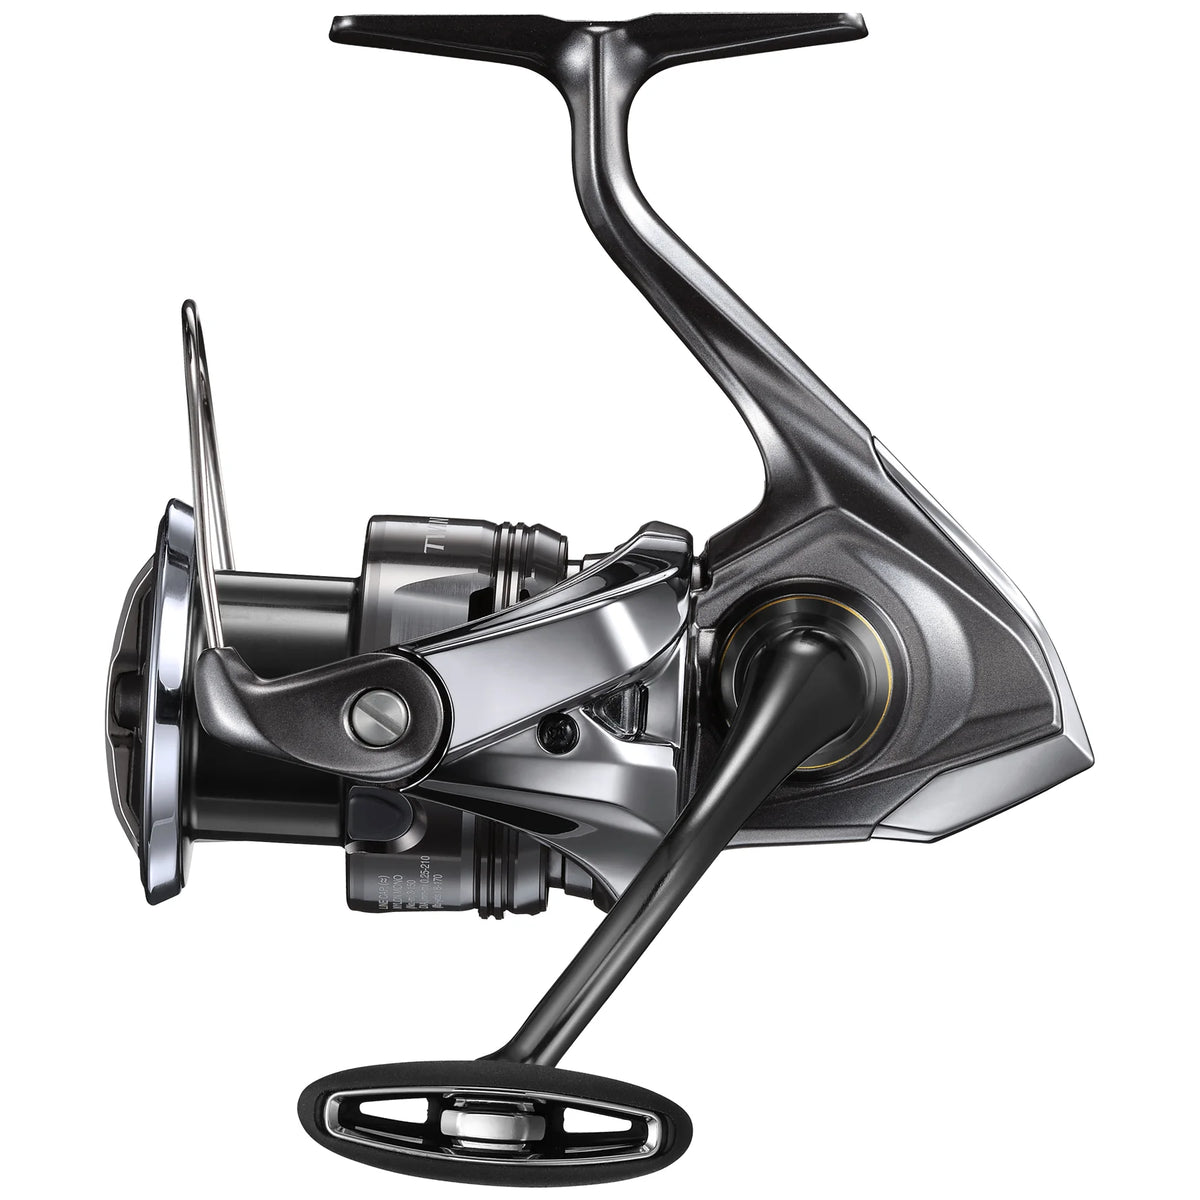 Shimano Spinning Reel 05 Twin Power 2500 Body Only No Spool or Handle USED